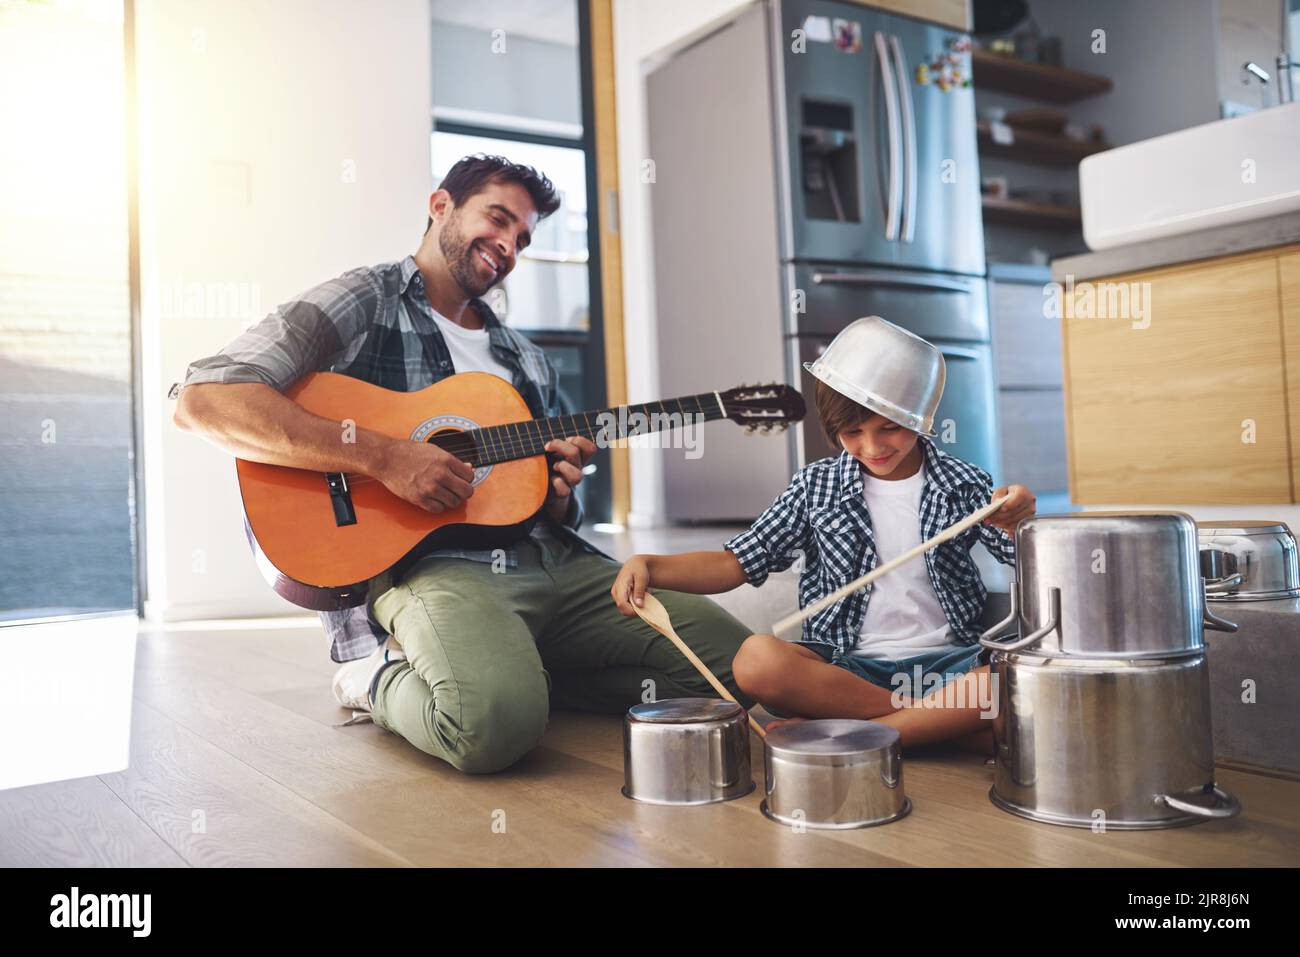 Take it away, son. a happy father accompanying his young son on the guitar while he drums on a set of cooking pots. Stock Photo